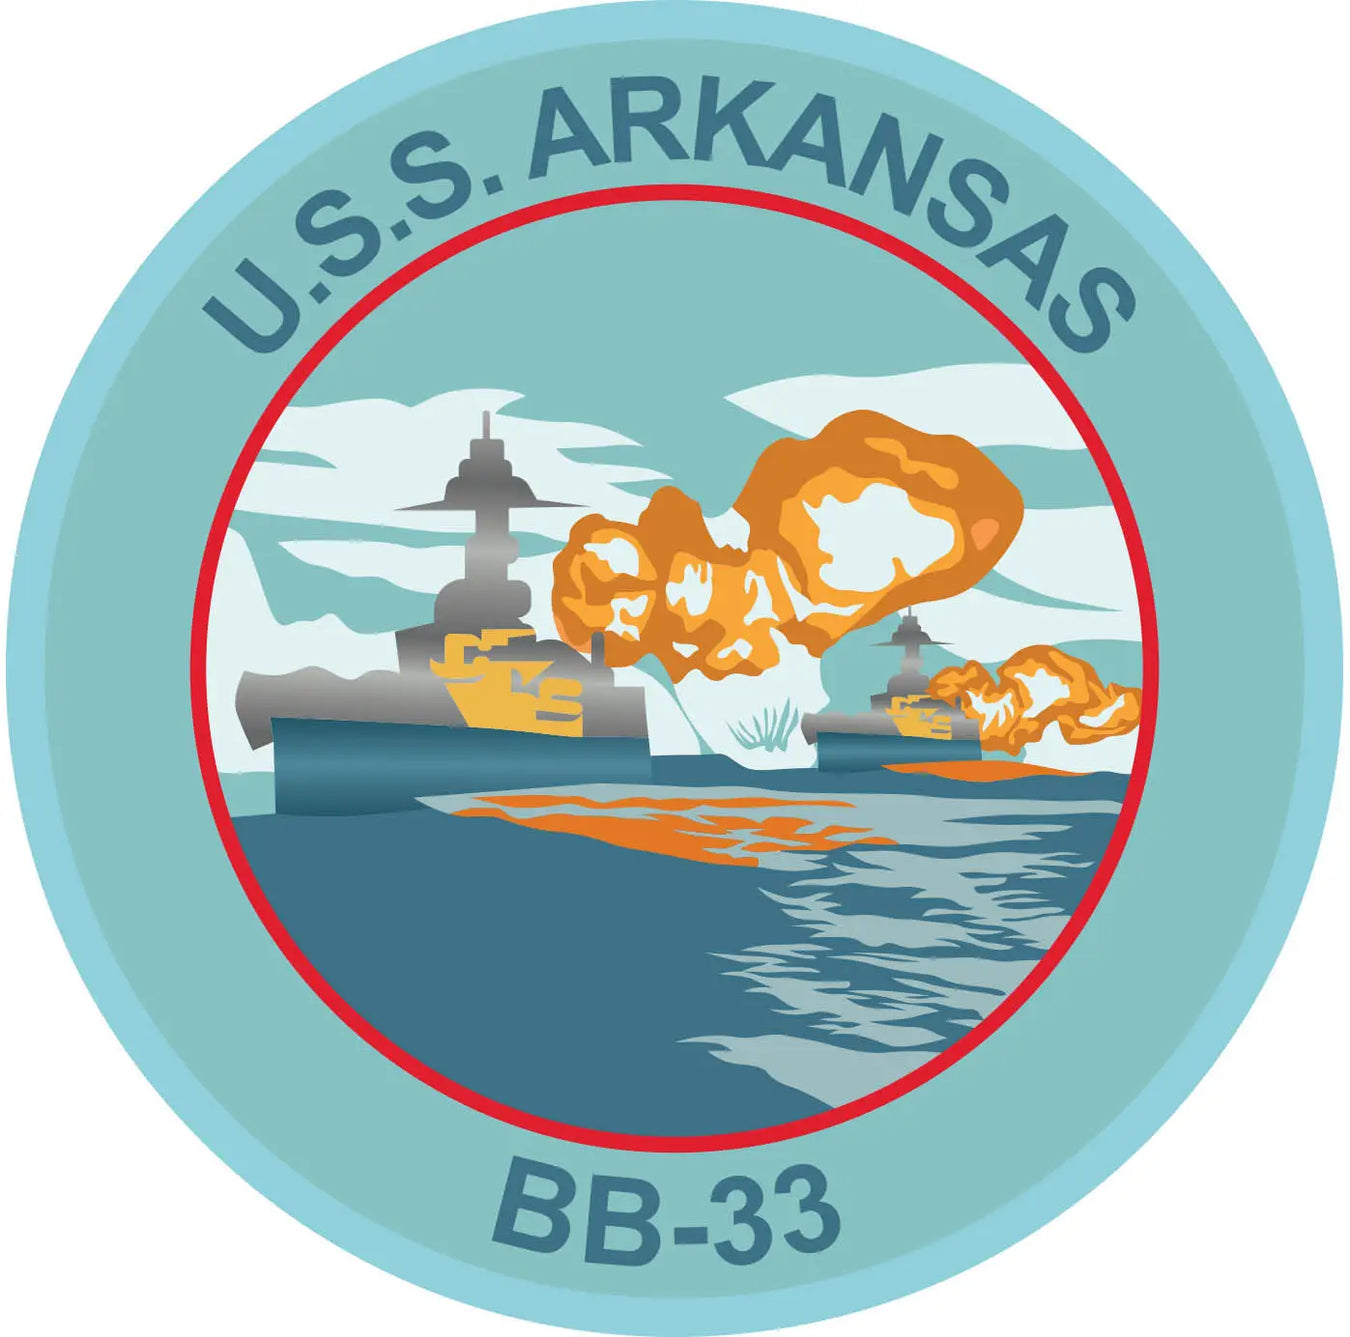 USS Arkansas (BB-33) Merchandise - Shop T-Shirts, hoodies, patches, pins, flags, decals, hats and more.